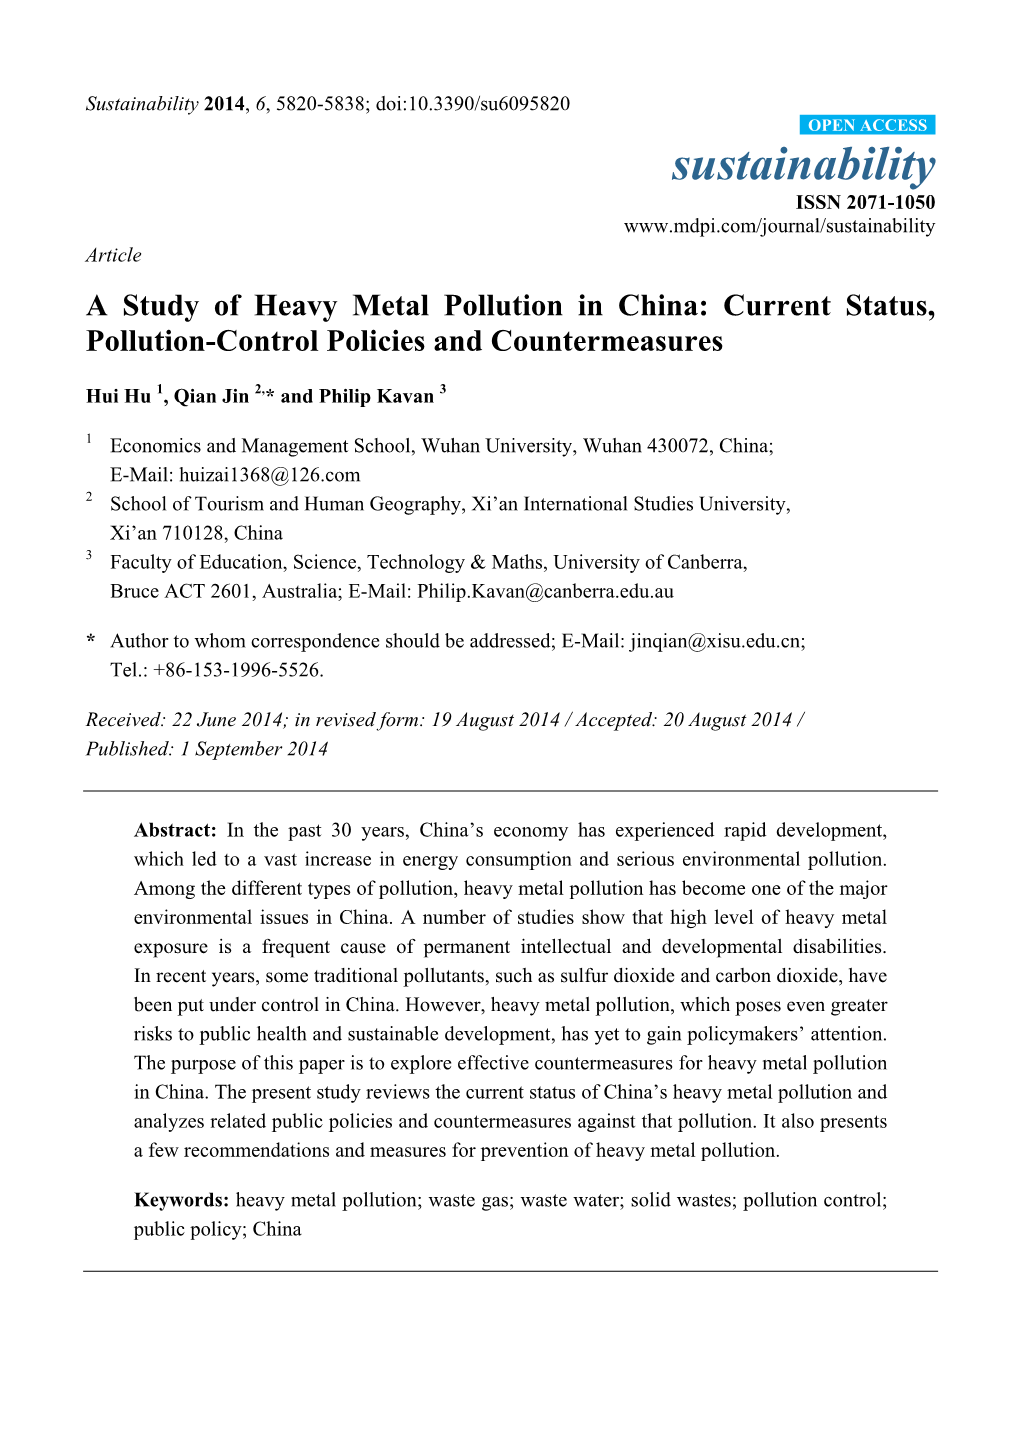 A Study of Heavy Metal Pollution in China: Current Status, Pollution-Control Policies and Countermeasures